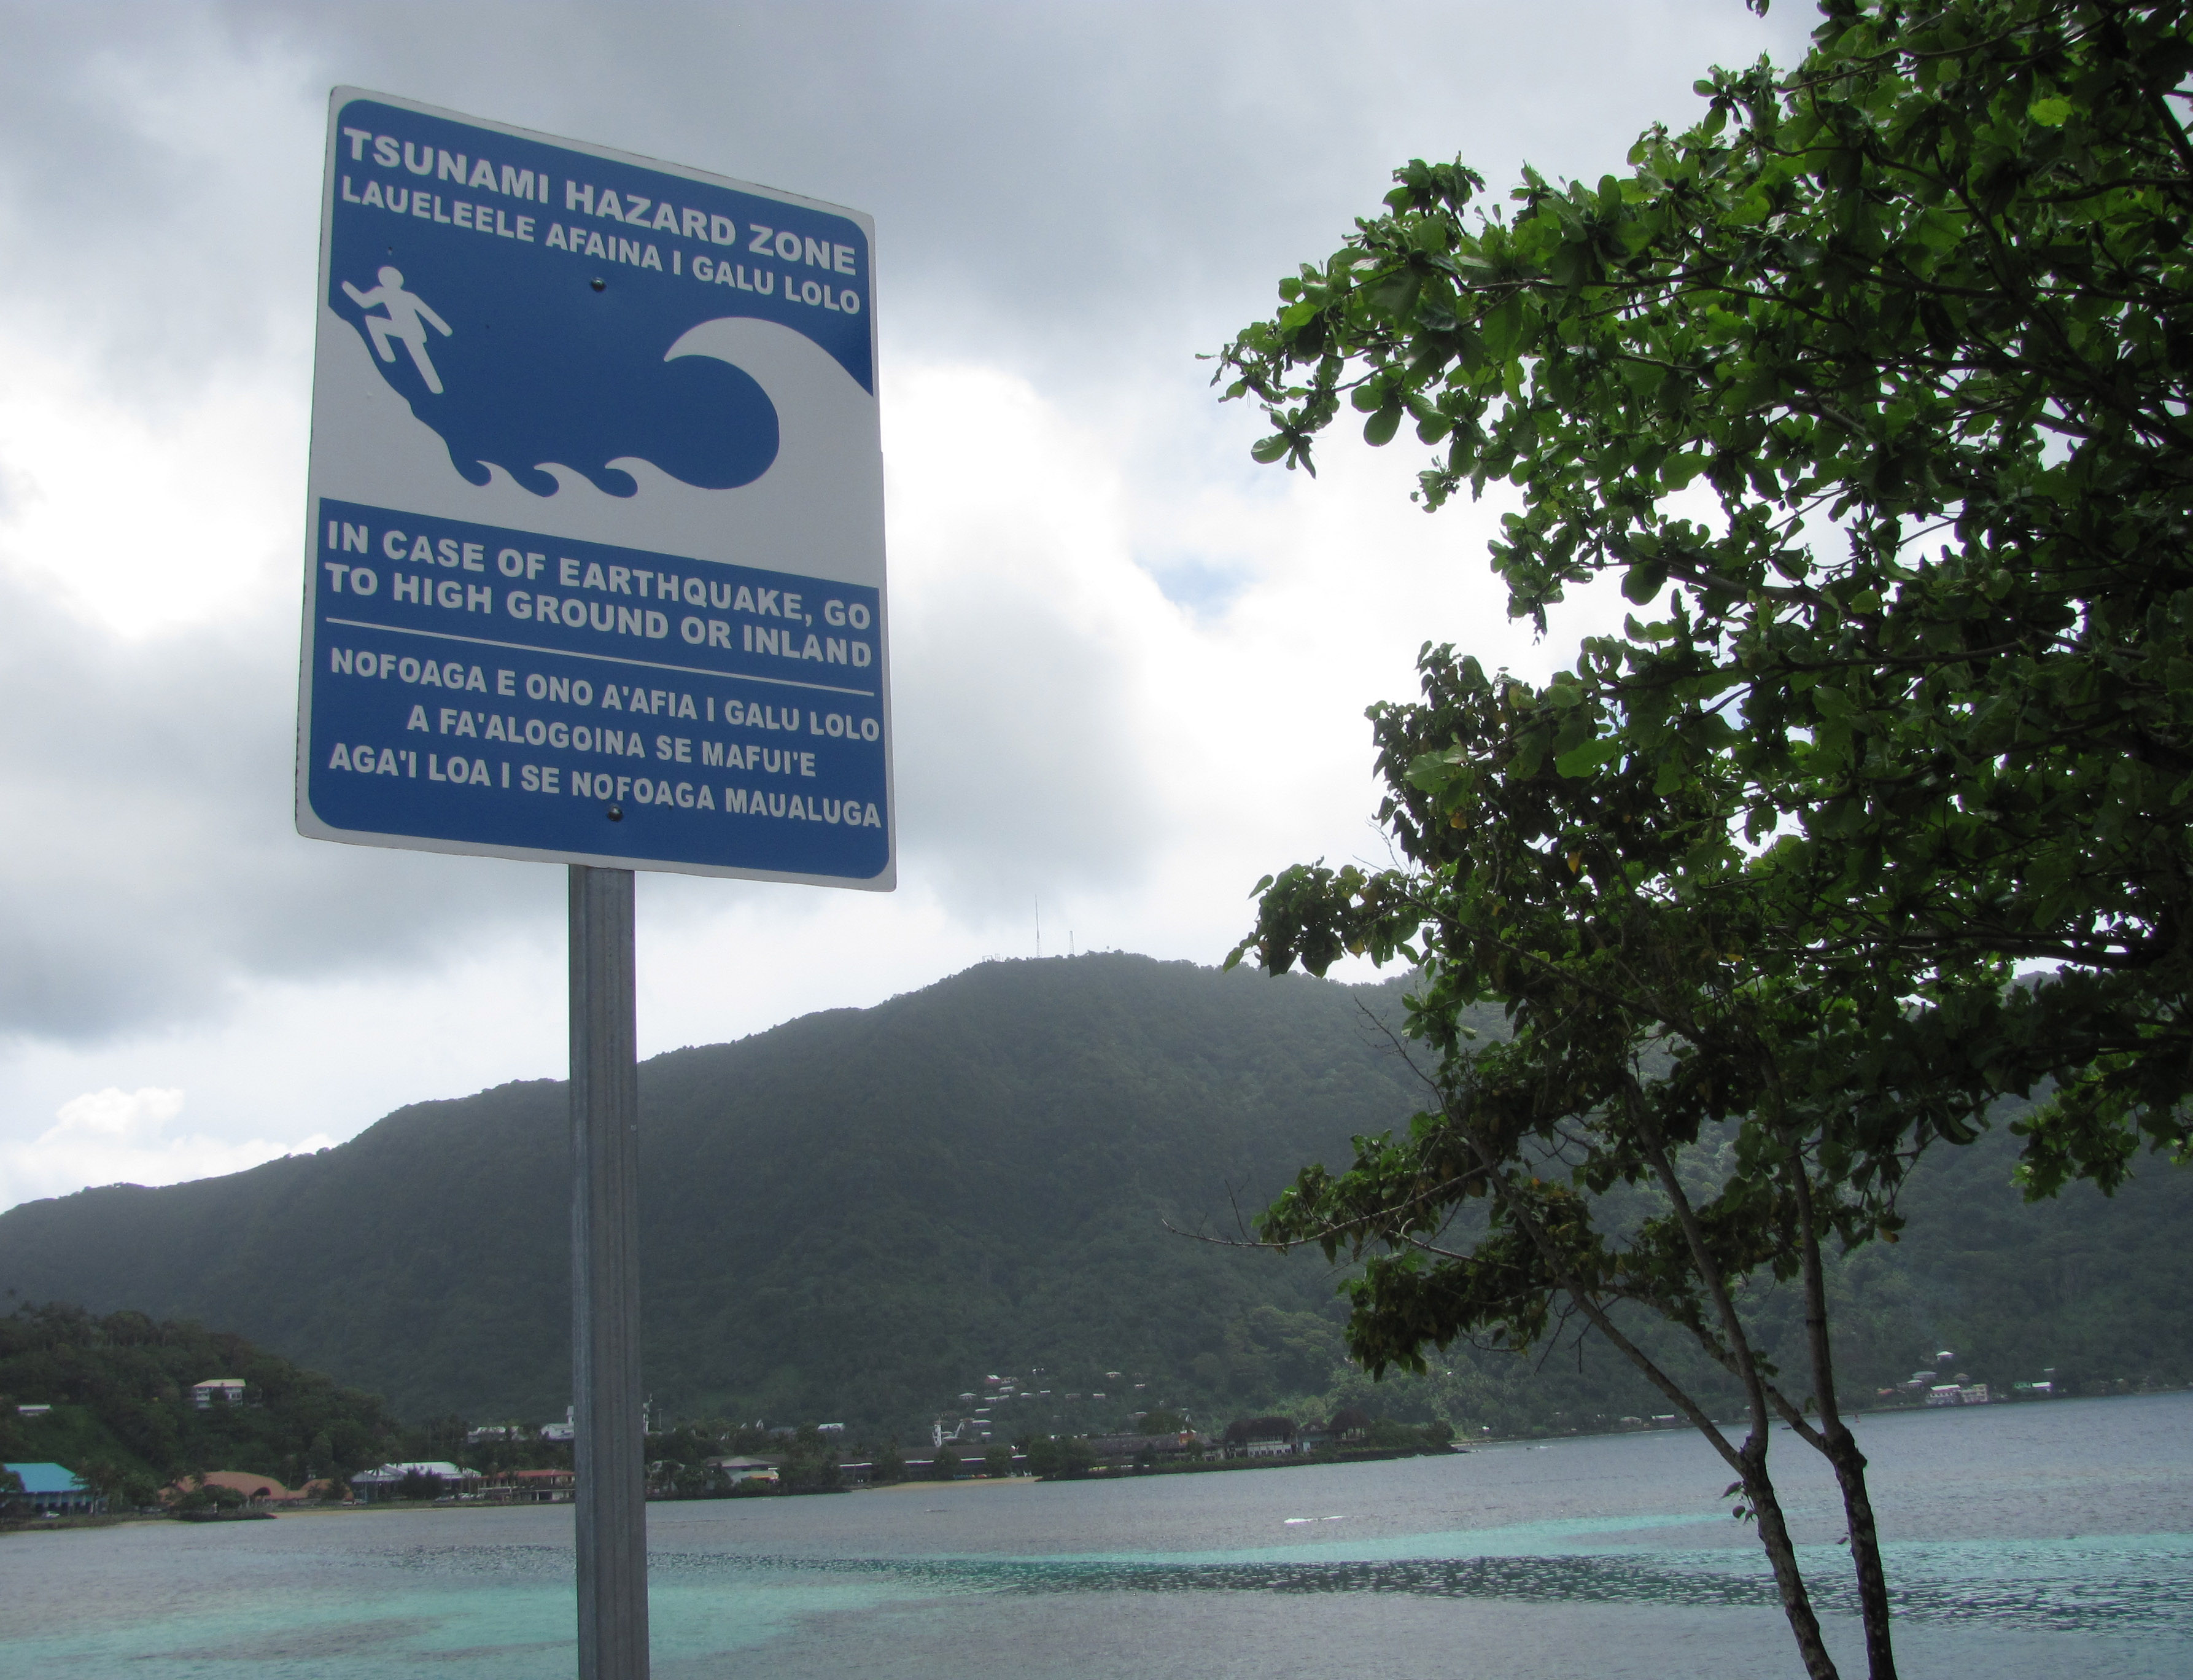 Emergency signage as part of "Tsunami Ready" designation in Pago Pago, American Samoa, September. 28, 2012.